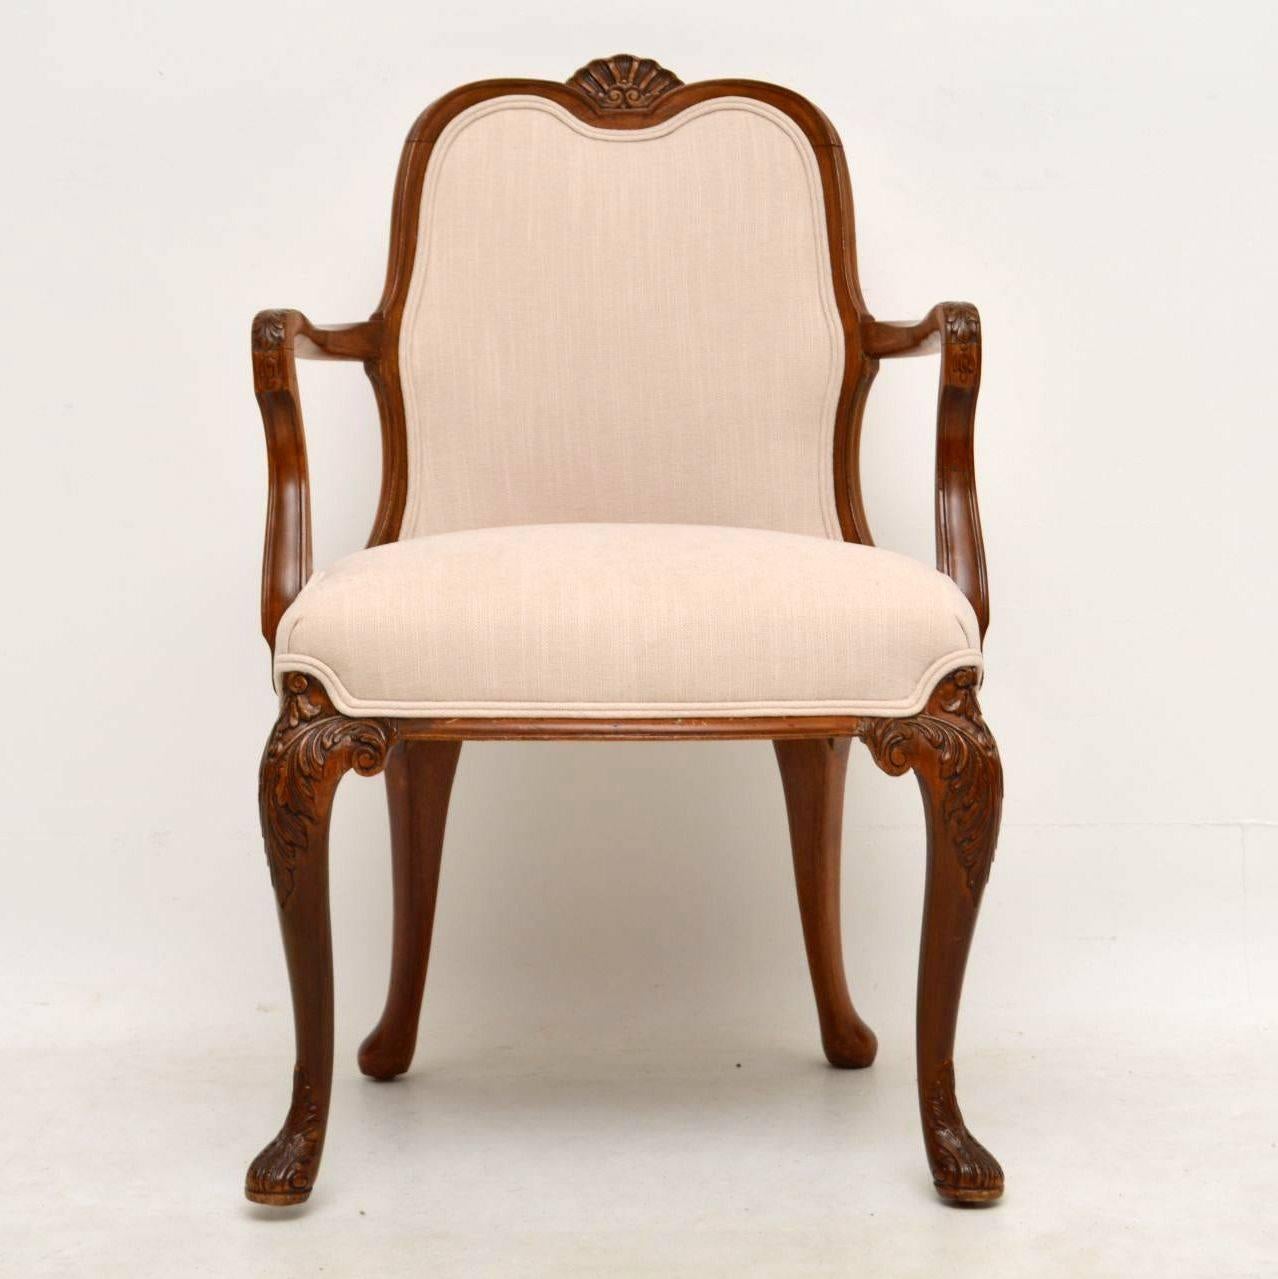 This solid walnut upholstered open armchair is in good condition and dates from the 1910-20’s period. It’s very much Queen Anne design with the typical carvings & the shepherds crook arms. There are shell carvings on the tops of the solid walnut